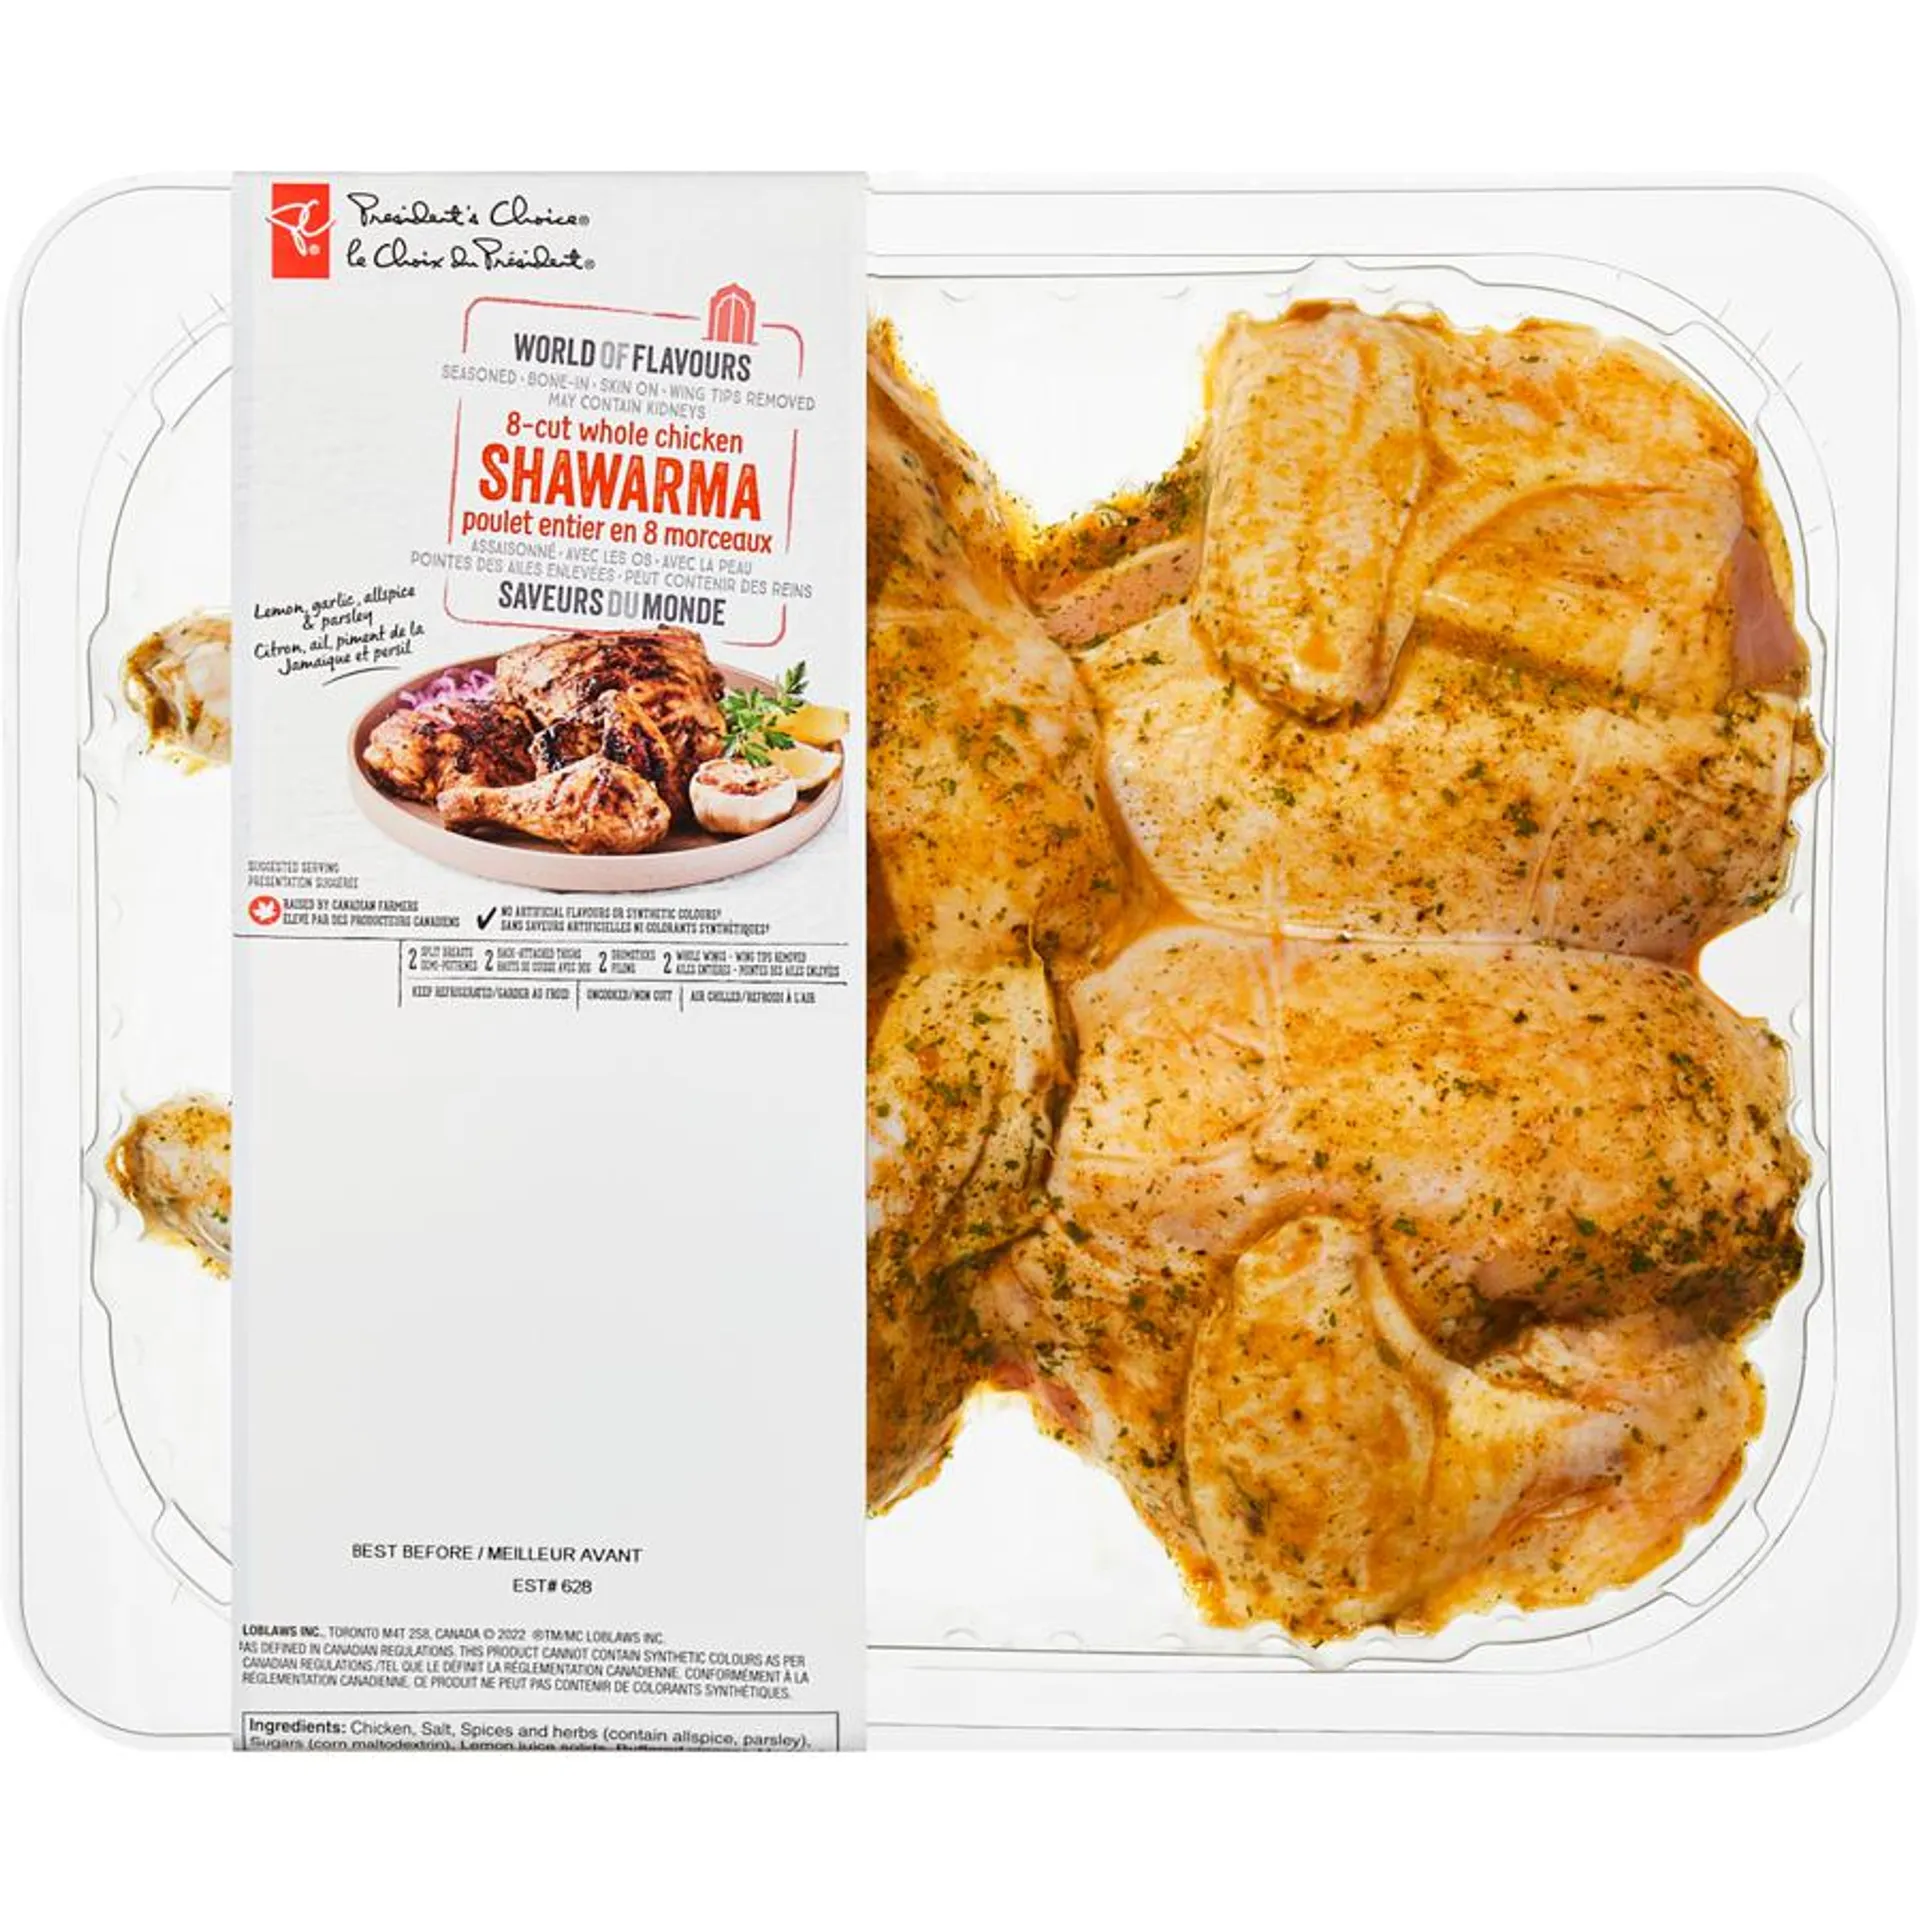 World of Flavours 8-Cut Shawarma Whole Chicken